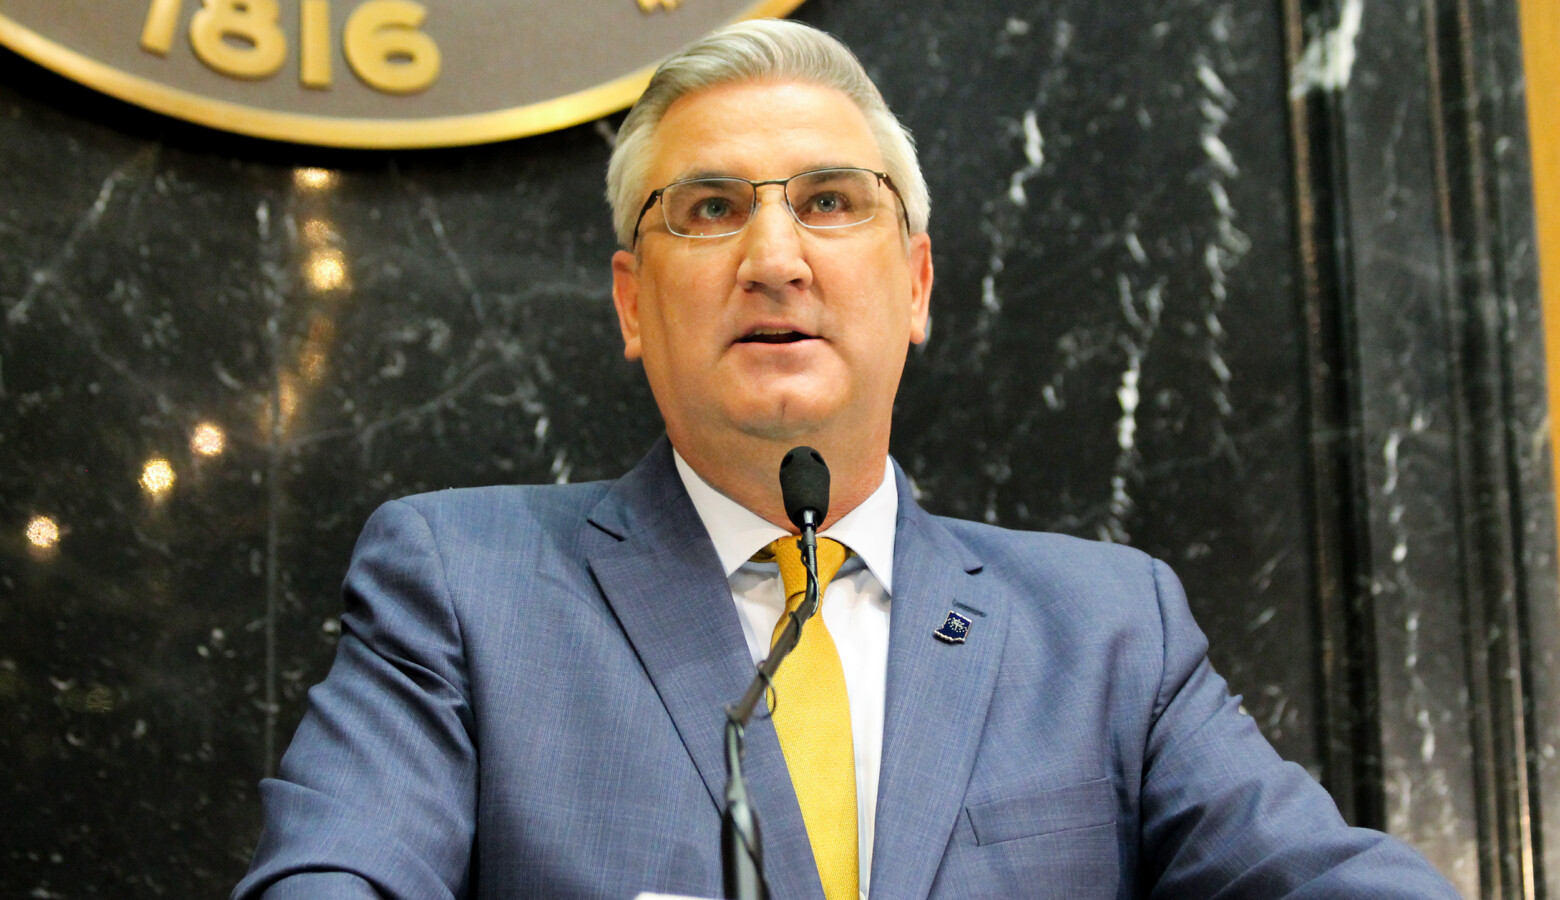 Gov. Eric Holcomb said while COVID-19 numbers are improving, it’s not time for a “mission accomplished” moment. (Lauren Chapman/IPB News)